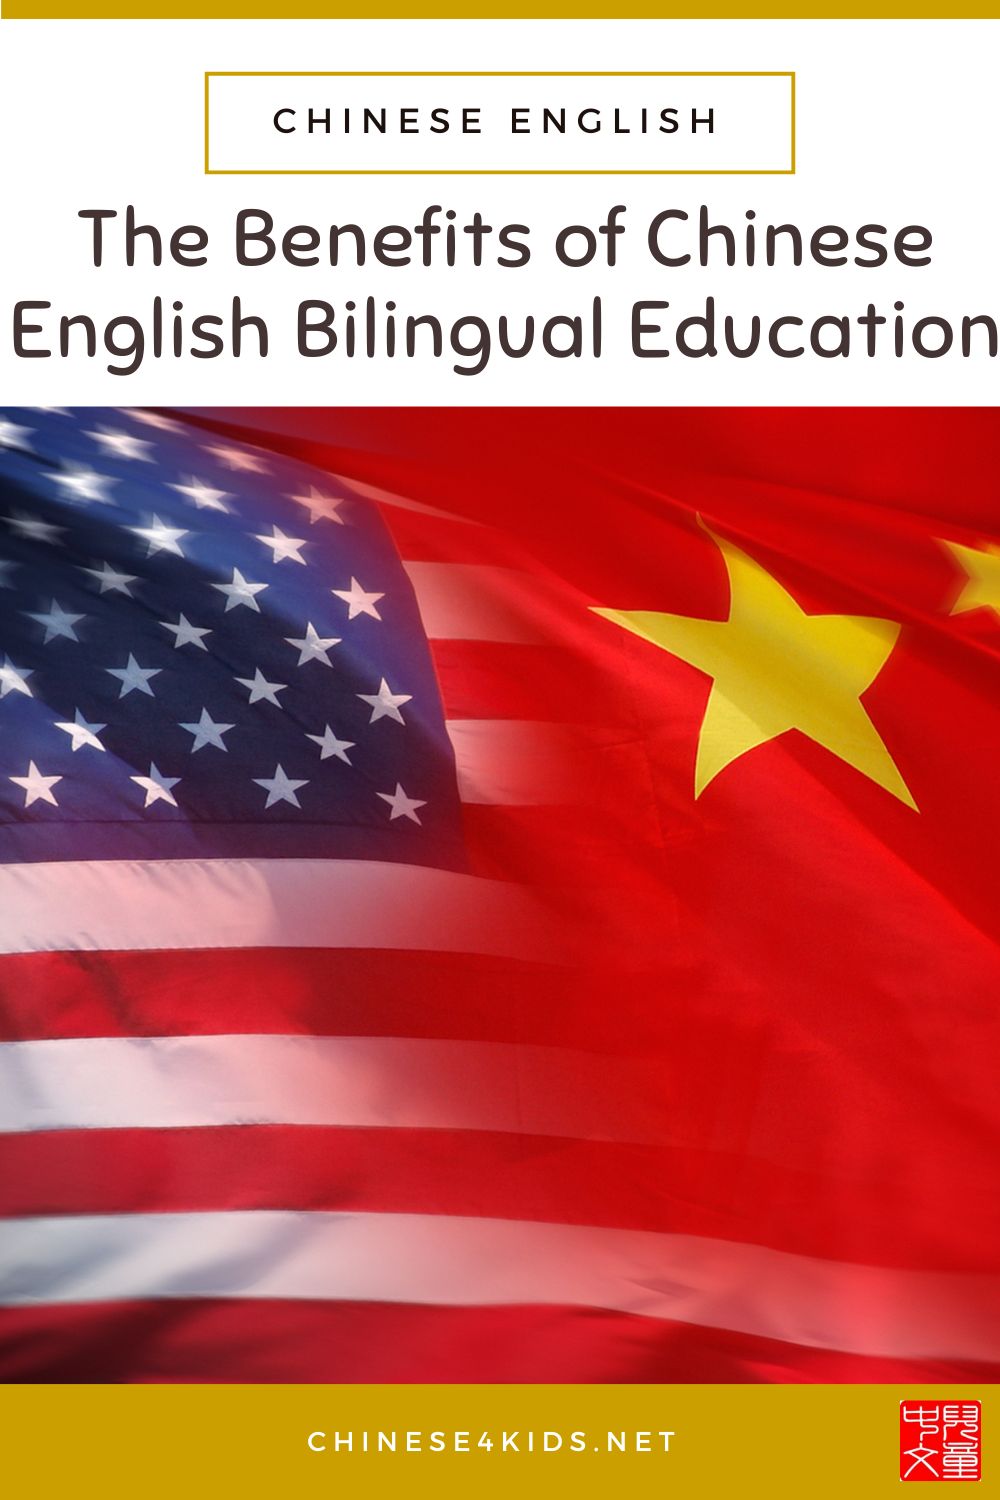 The Benefits of Bilingual Education: Learning Mandarin for Child Development